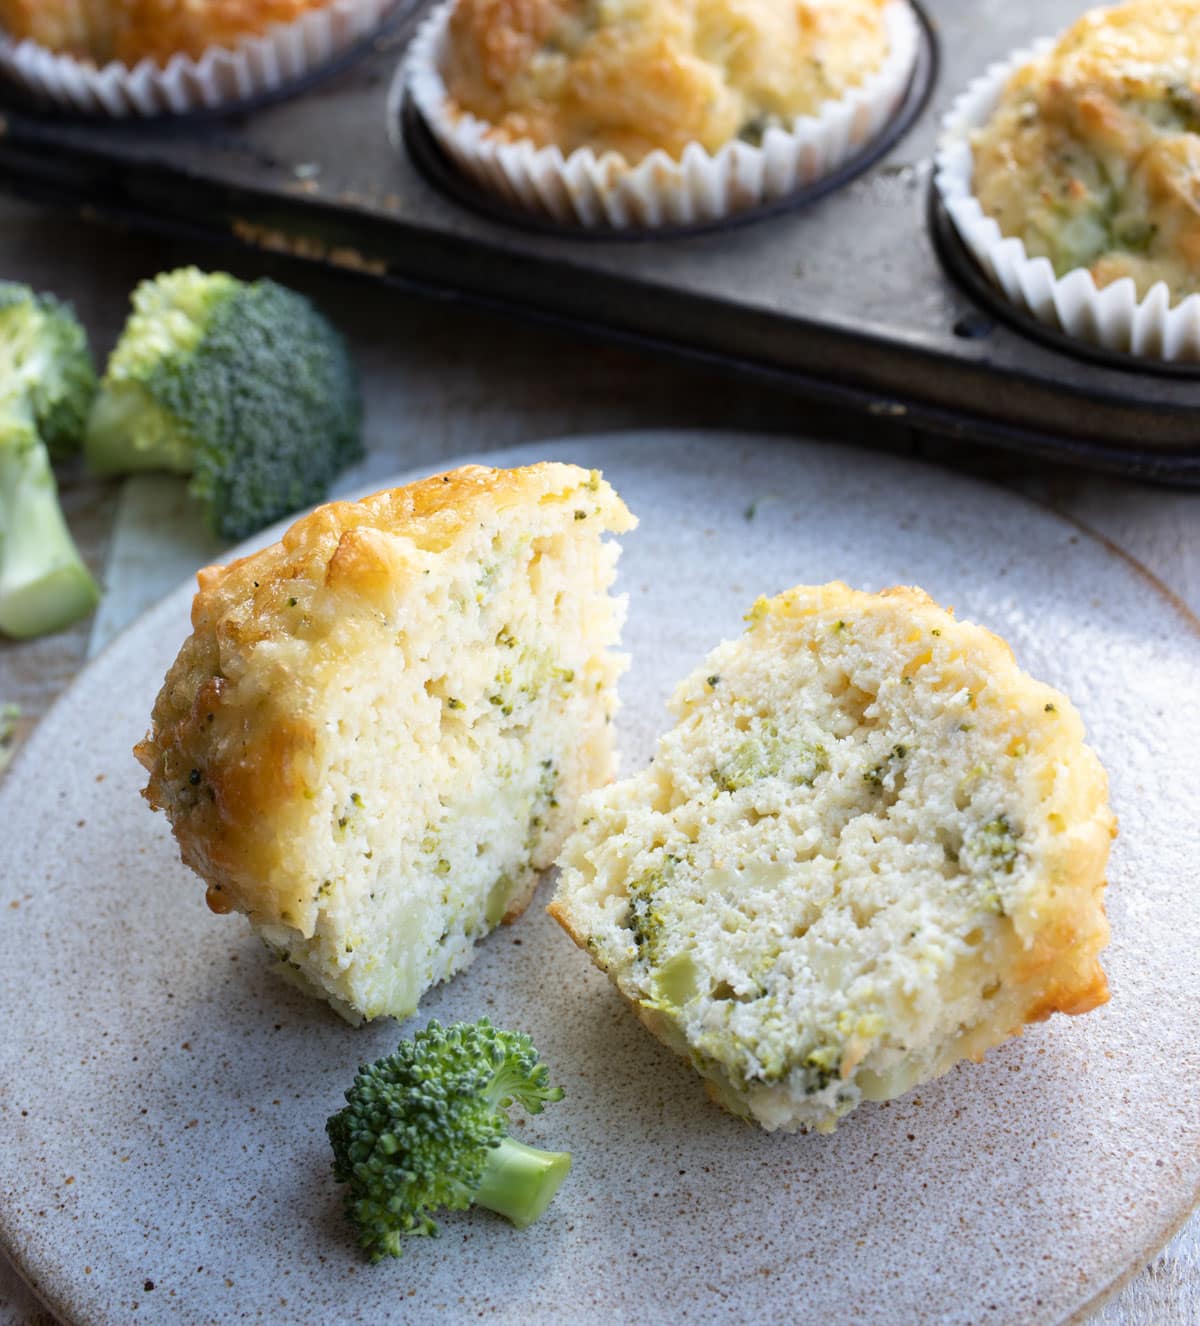 A savoury muffin with broccoli on a plate, sliced in half.